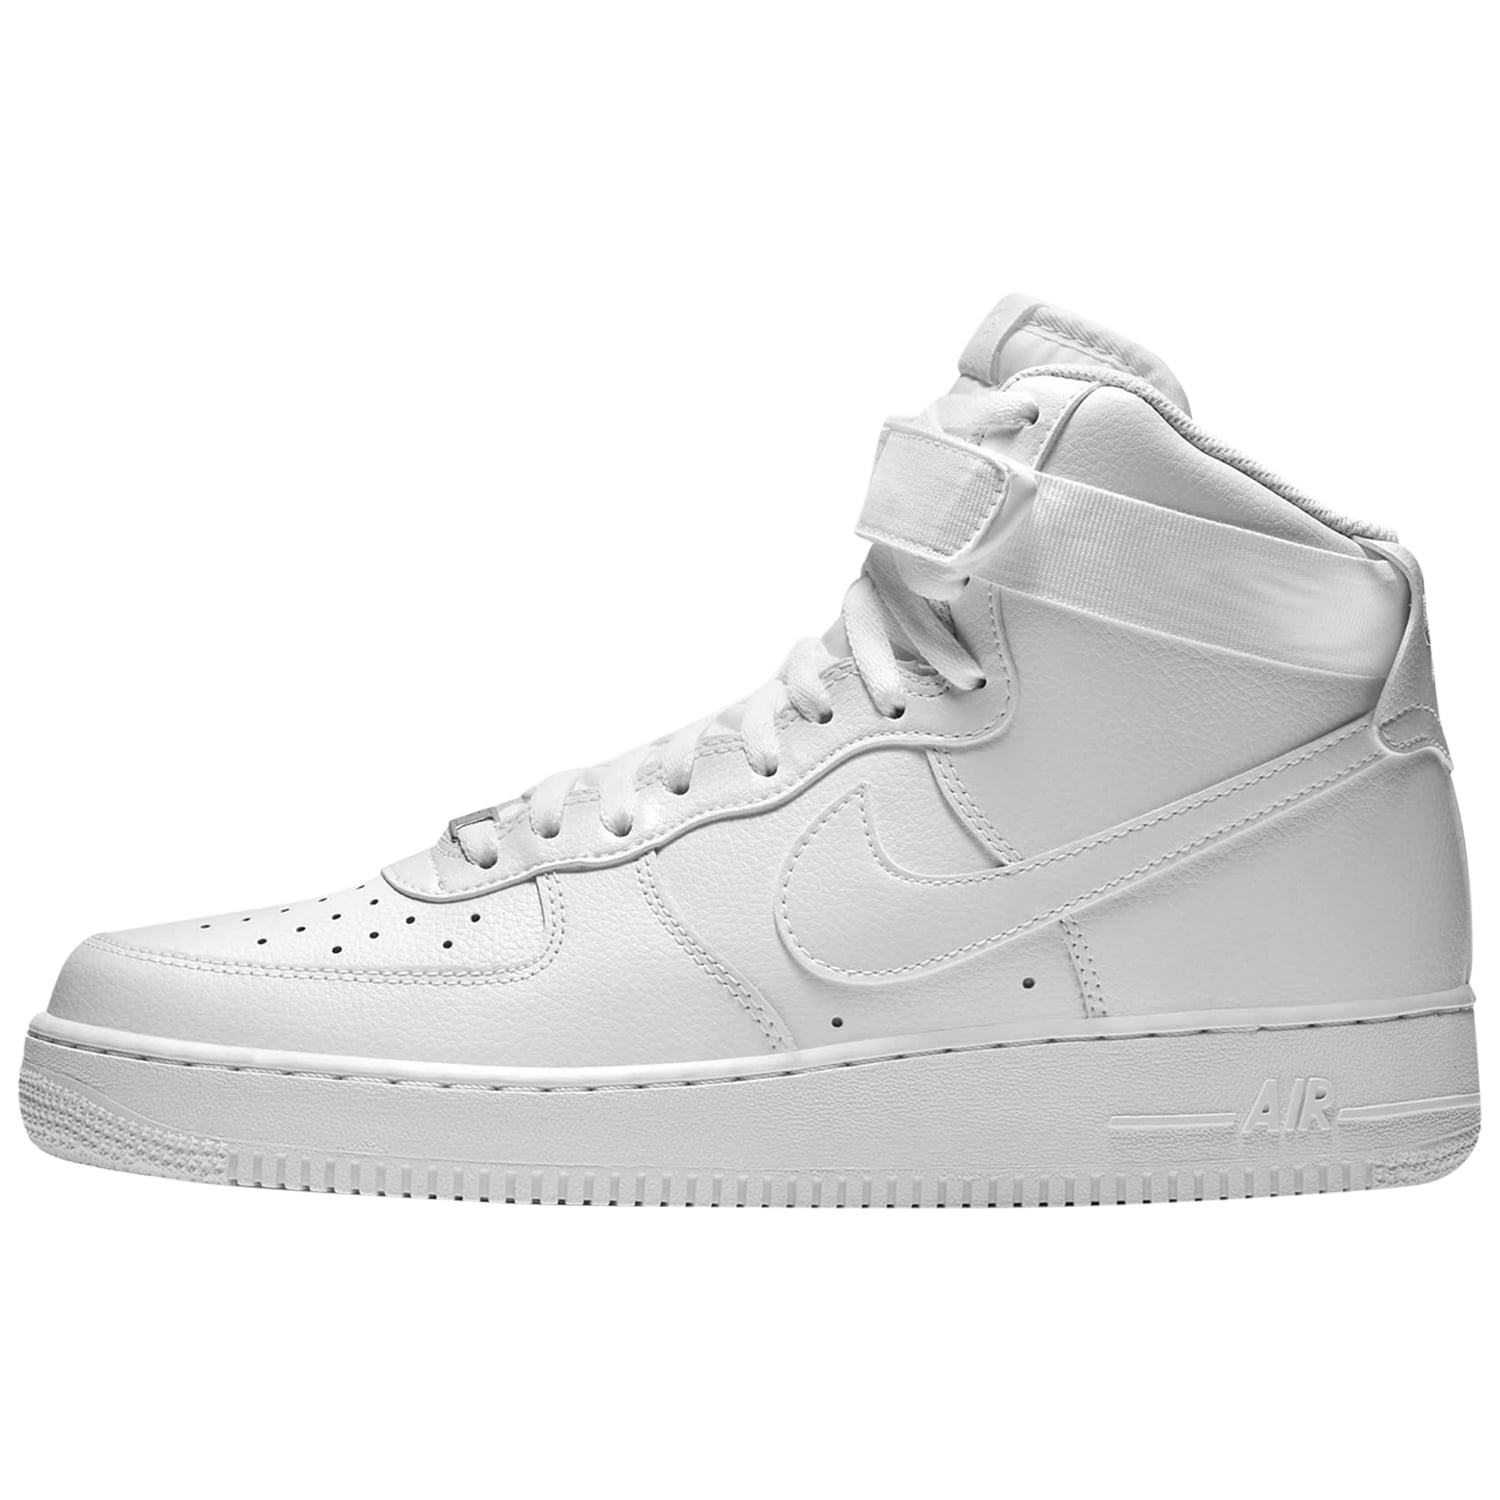 Nike Air Force 1 High 07 Mens Style : Cw2290-111 New Zealand | Ubuy